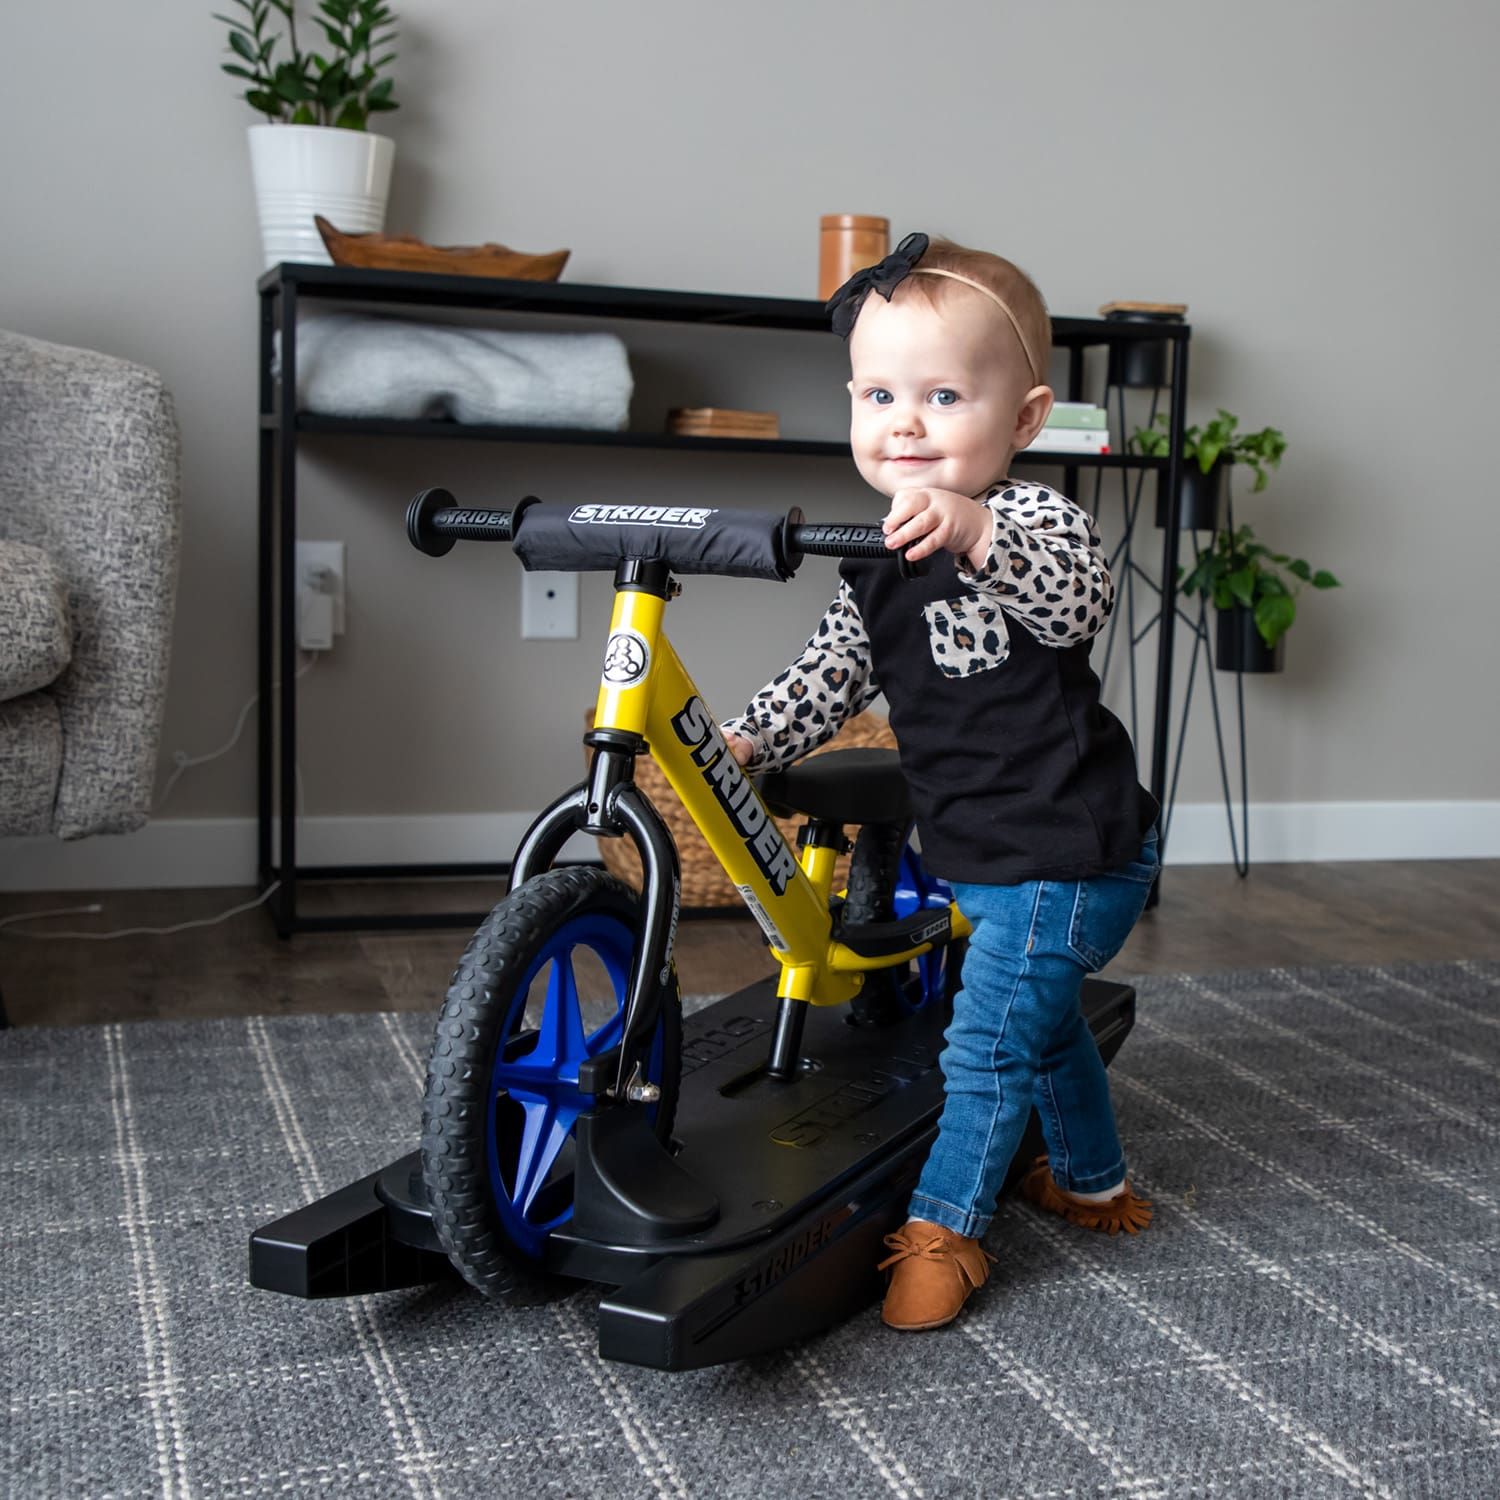 A toddler smiles as she prepares to get on a yellow Strider 12 Sport 2-in-1 Rocking Bike with blue Ultralight Wheels